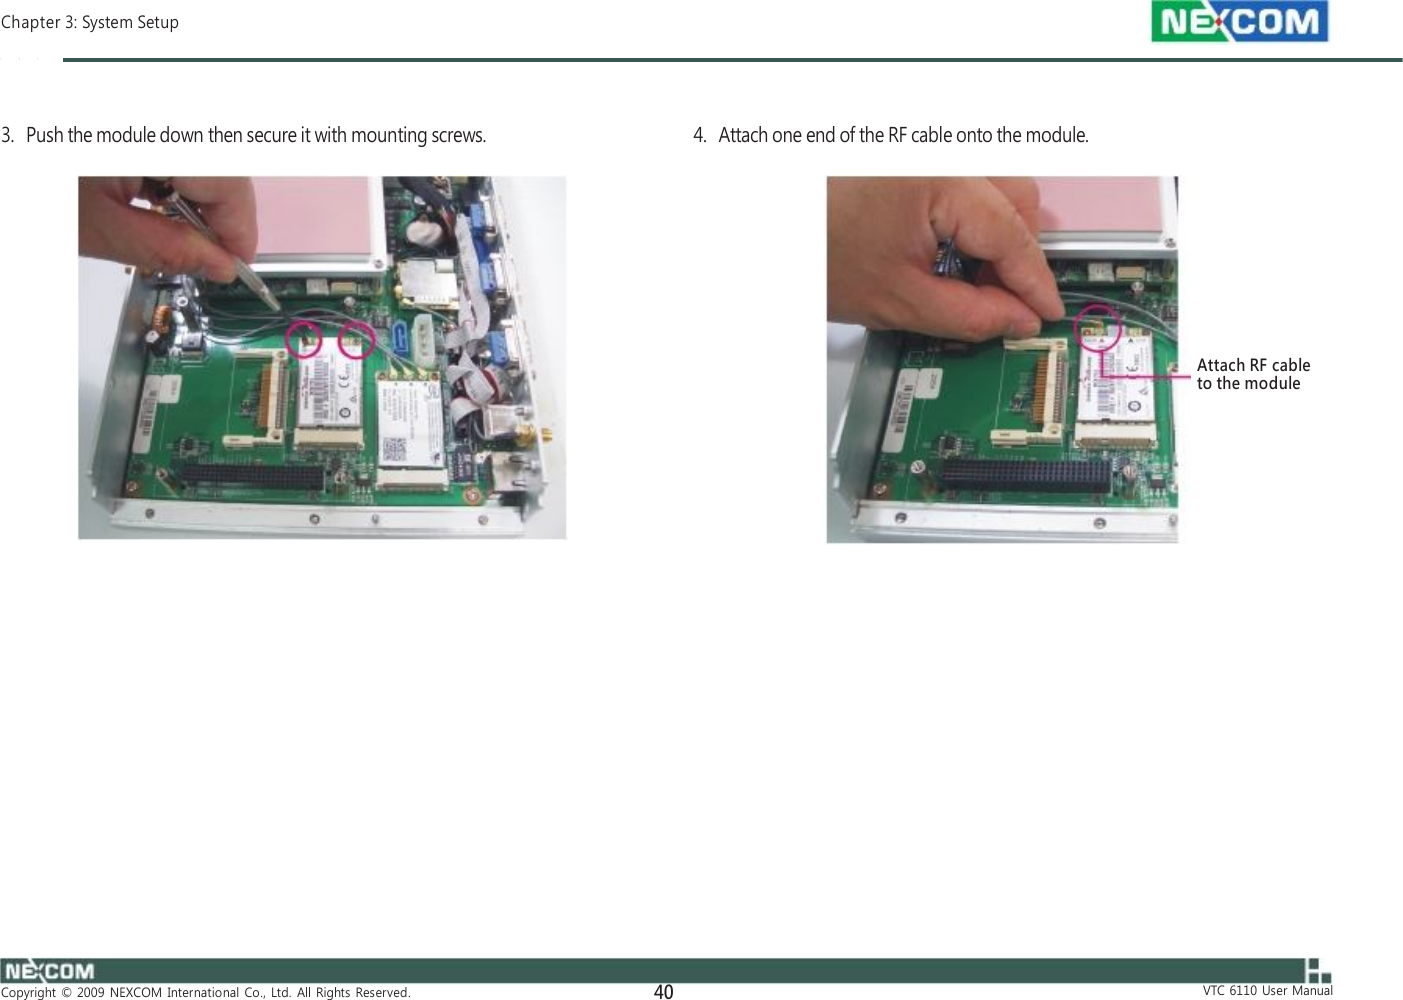  Chapter 3: System Setup    3.   Push the module down then secure it with mounting screws. 4.   Attach one end of the RF cable onto the module.         Attach RF cable to the module                        Copyright  ©  2009  NEXCOM  International  Co.,  Ltd.  All  Rights  Reserved. 40                        VTC  6110  User  Manual 